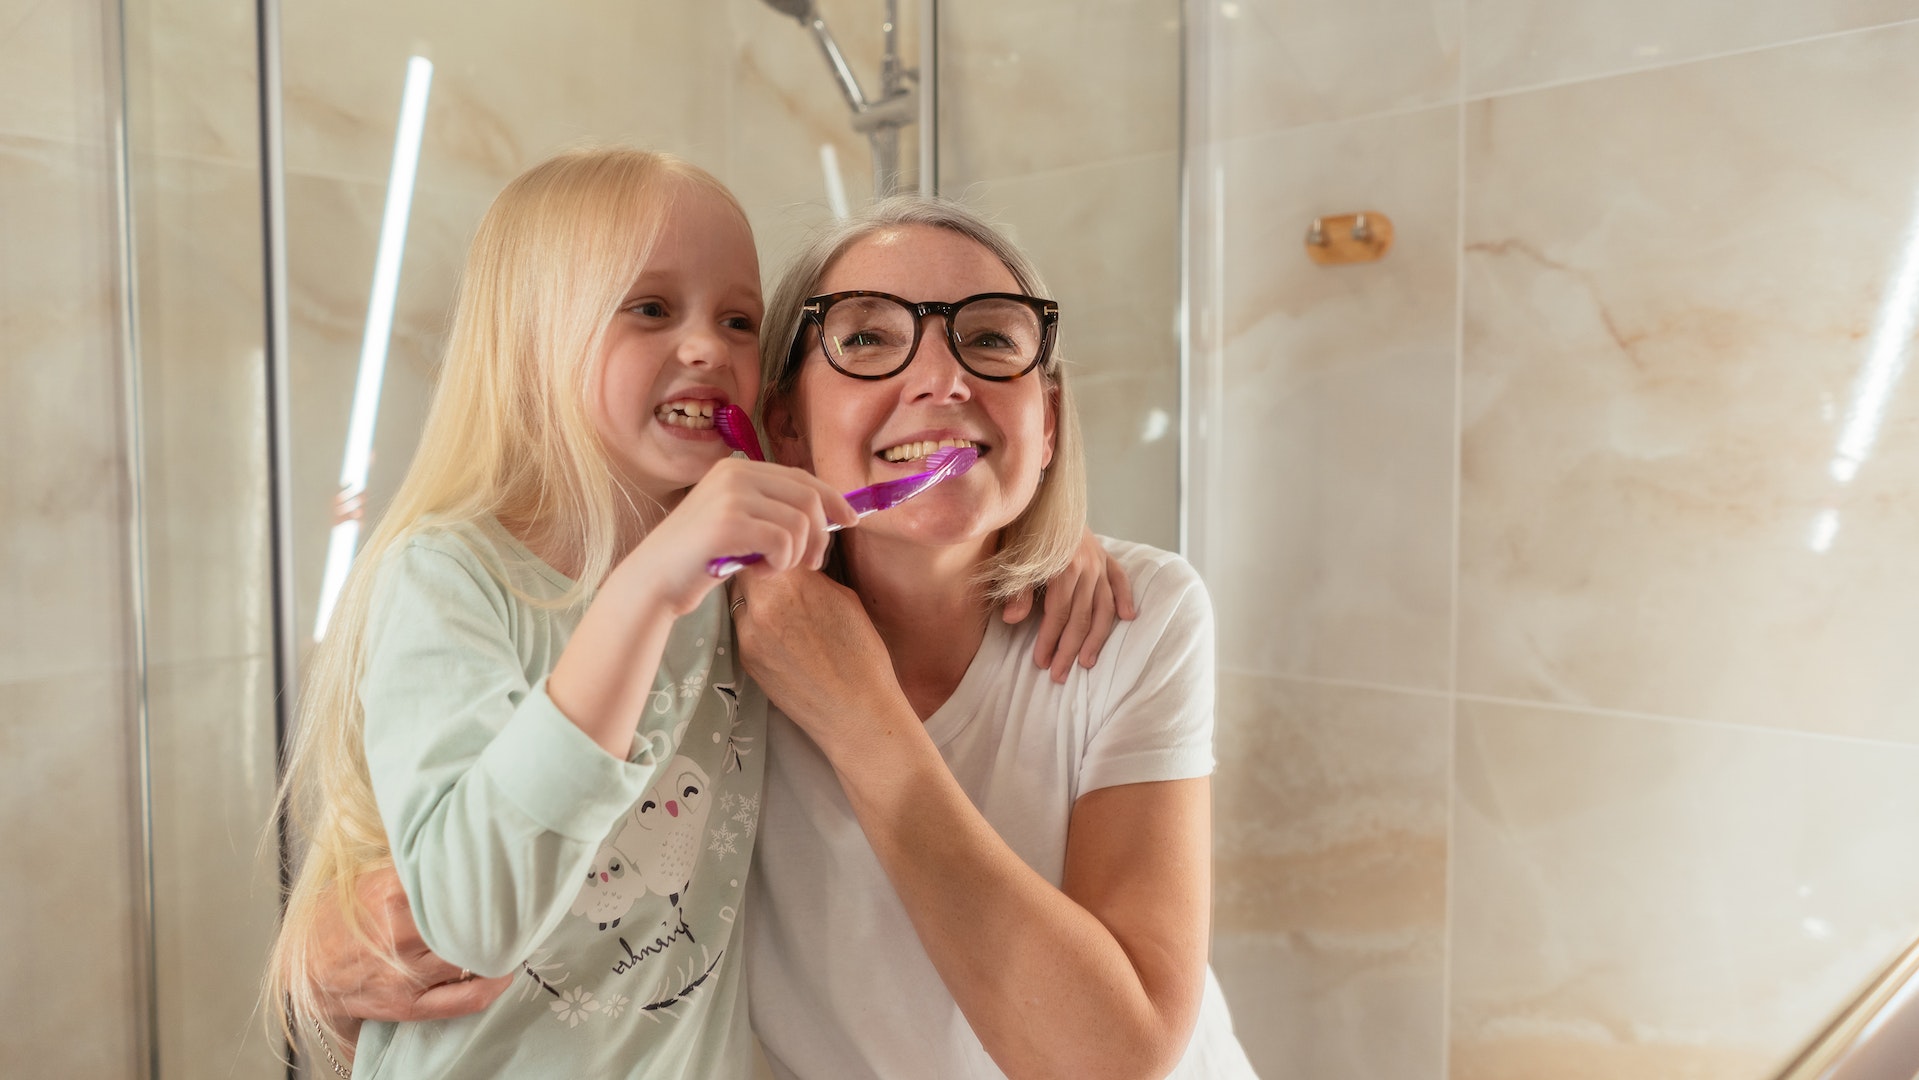 A woman and a child brushing their teeth